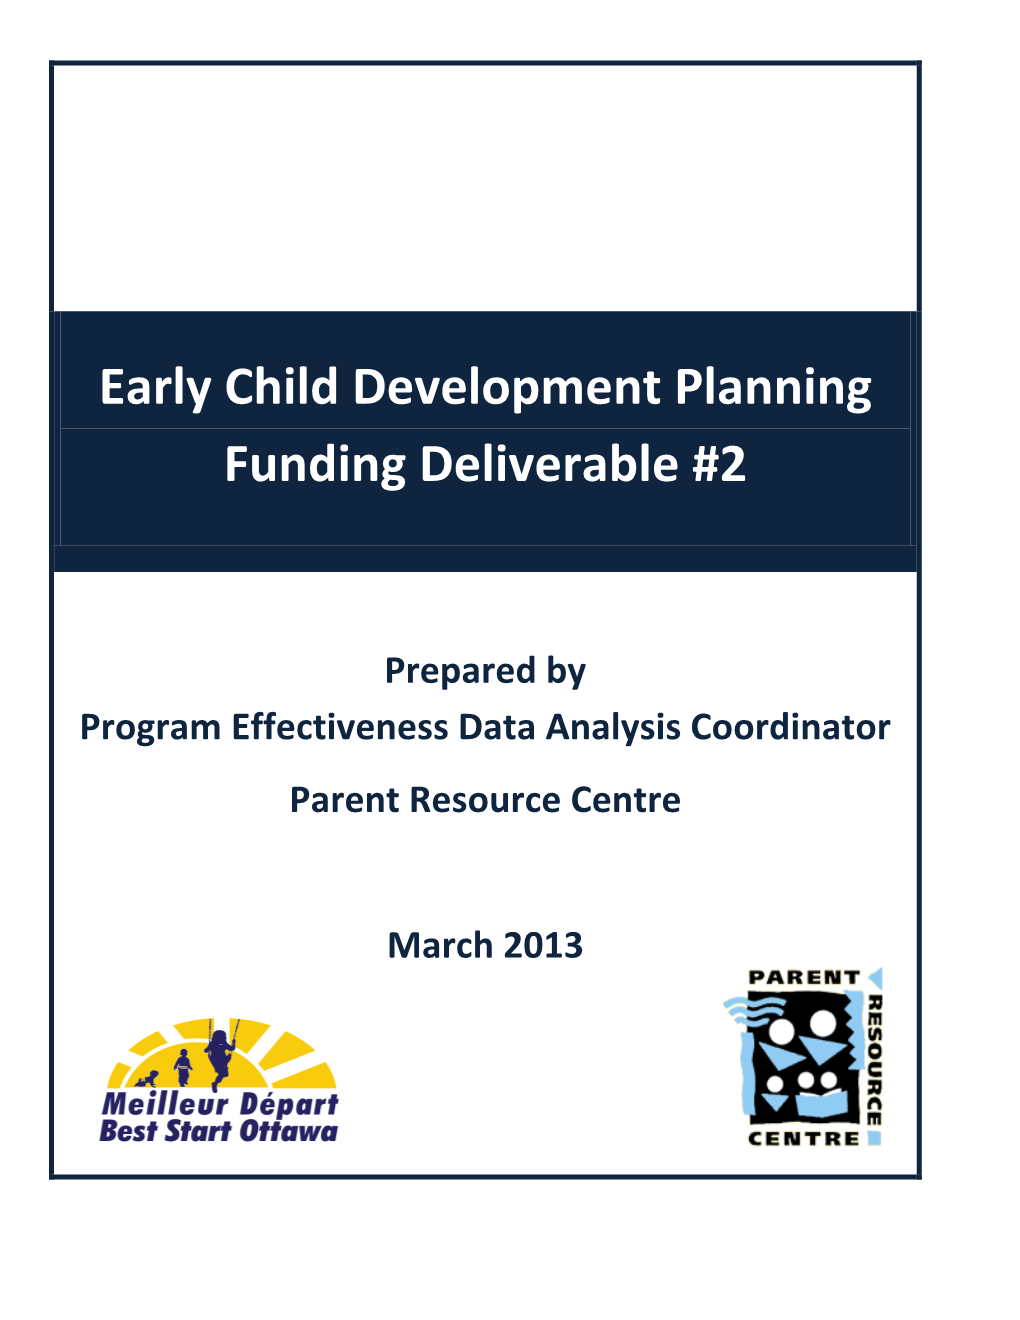 Early Child Development Planning Funding Deliverable #2 – Organizations by Service Functions